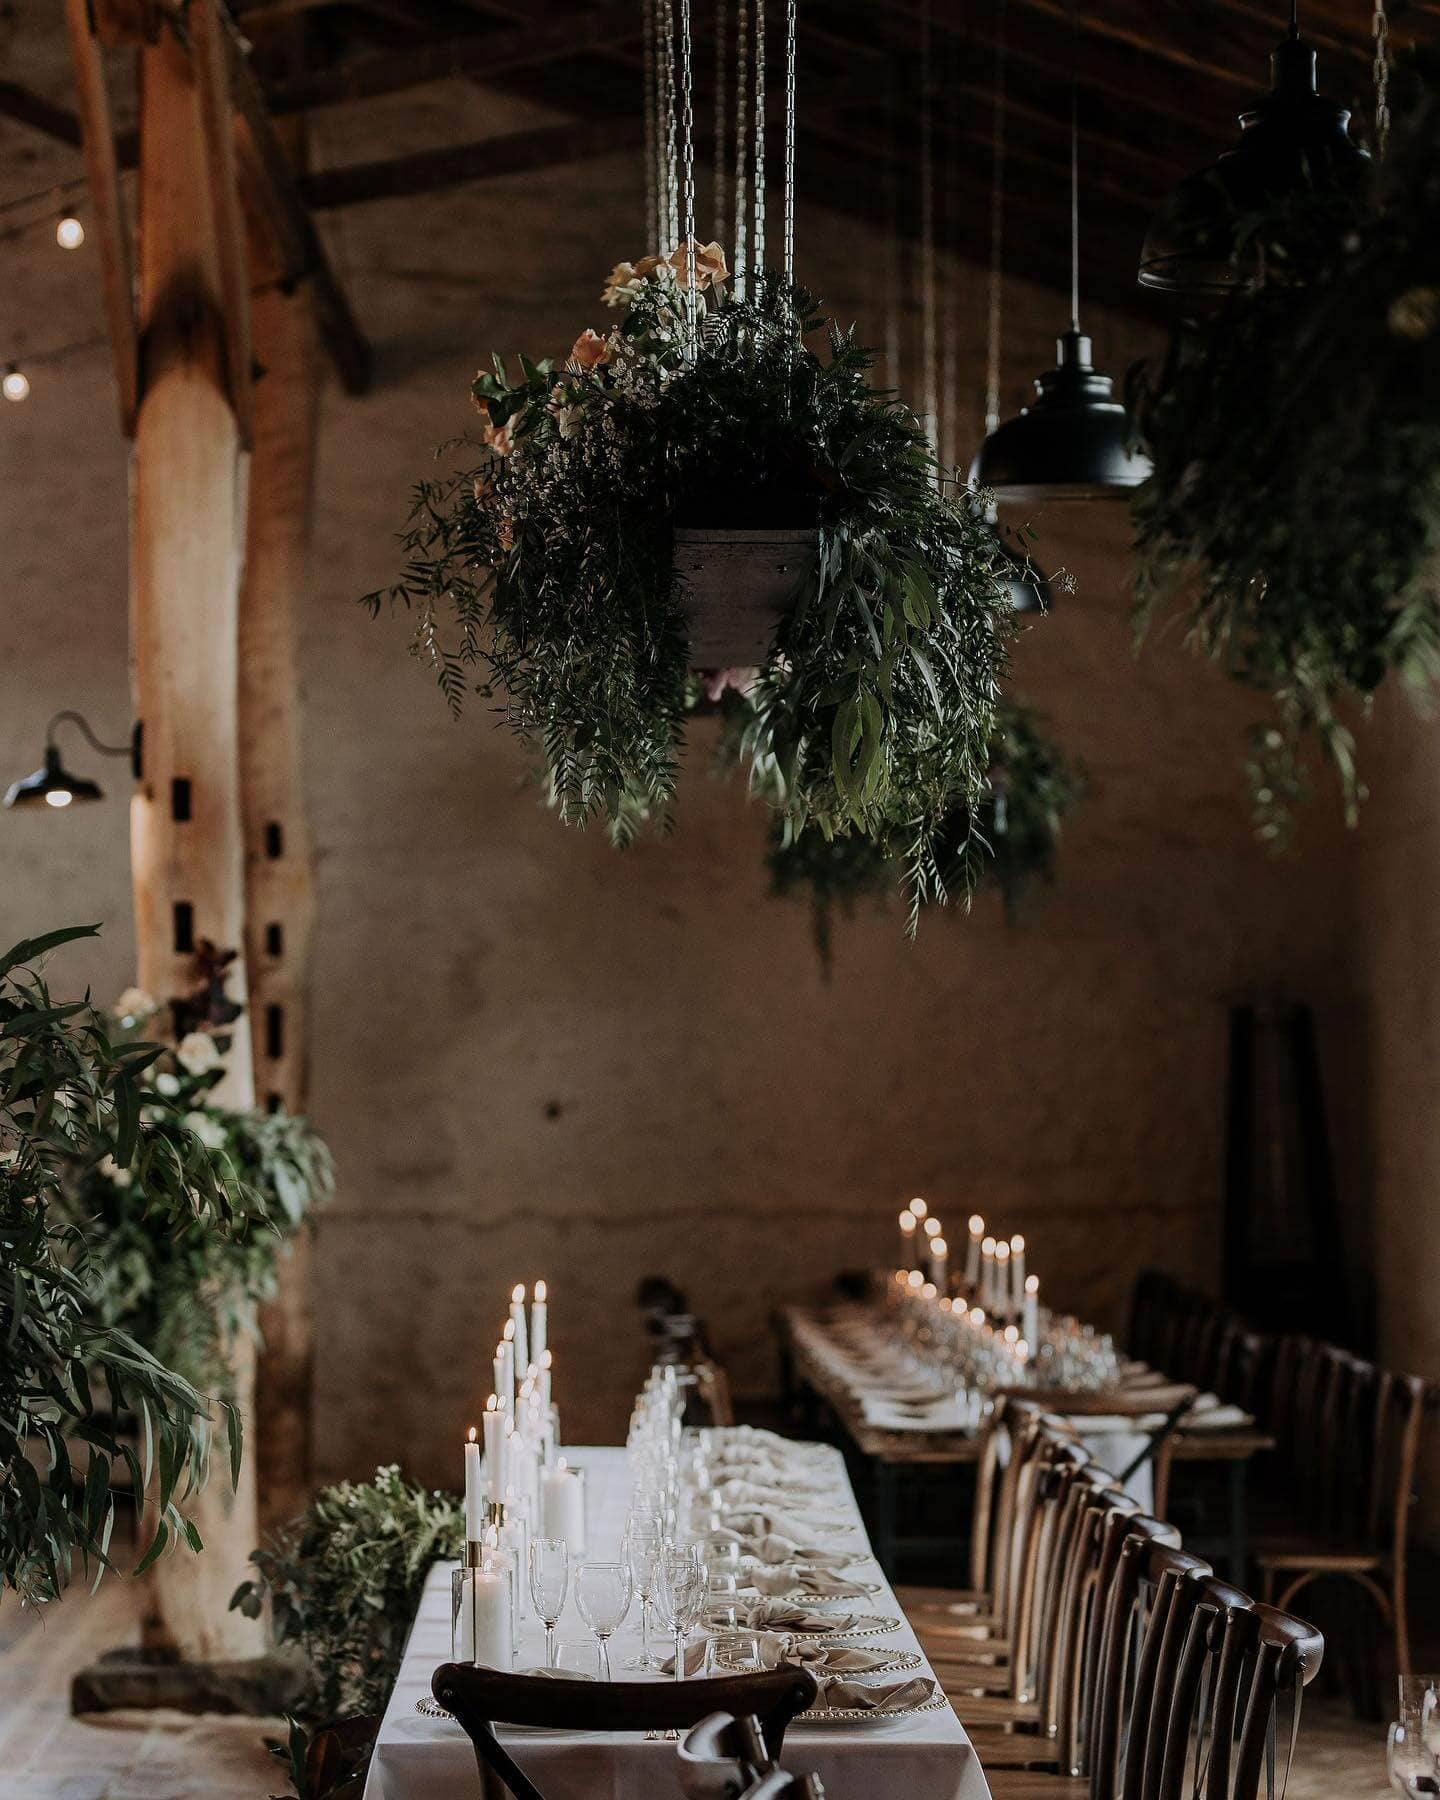 Best-rustic-country-wedding-venues-in-australia-Warrawong-Estate-Victoria-photo-White-Shutter-Photography